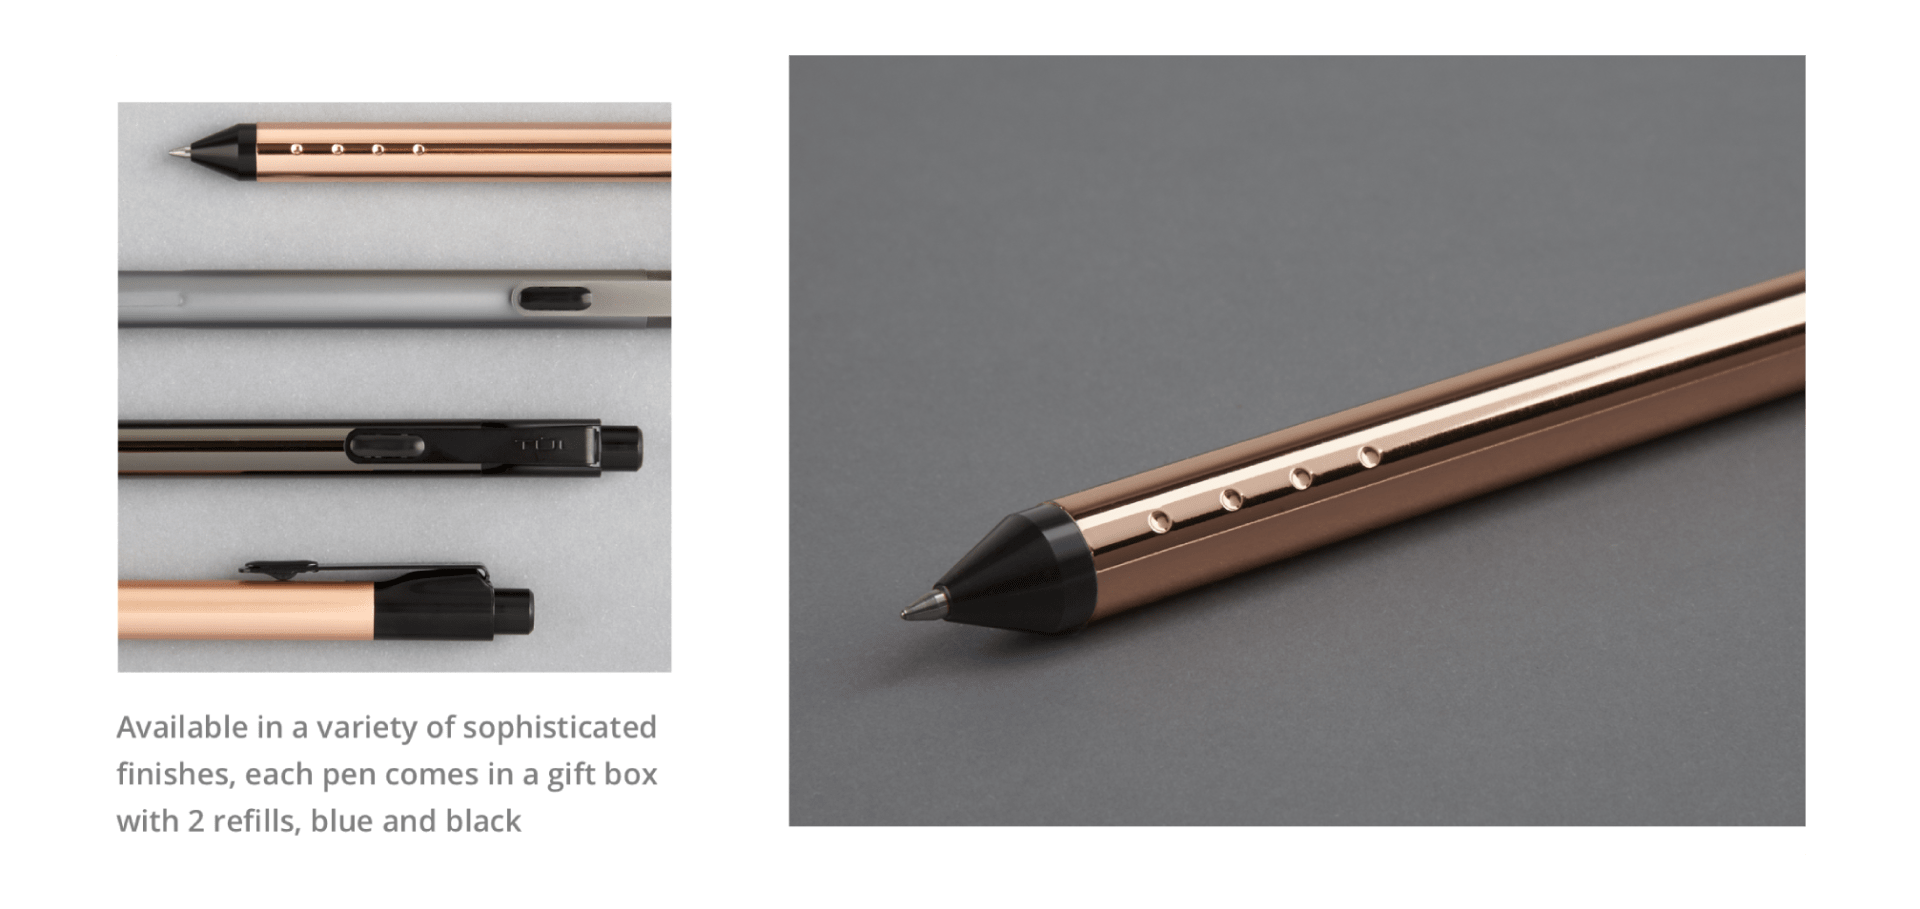 alt="Available in a variety of sophisticated finishes, each pen comes in a gift box with 2 refills, blue and black"